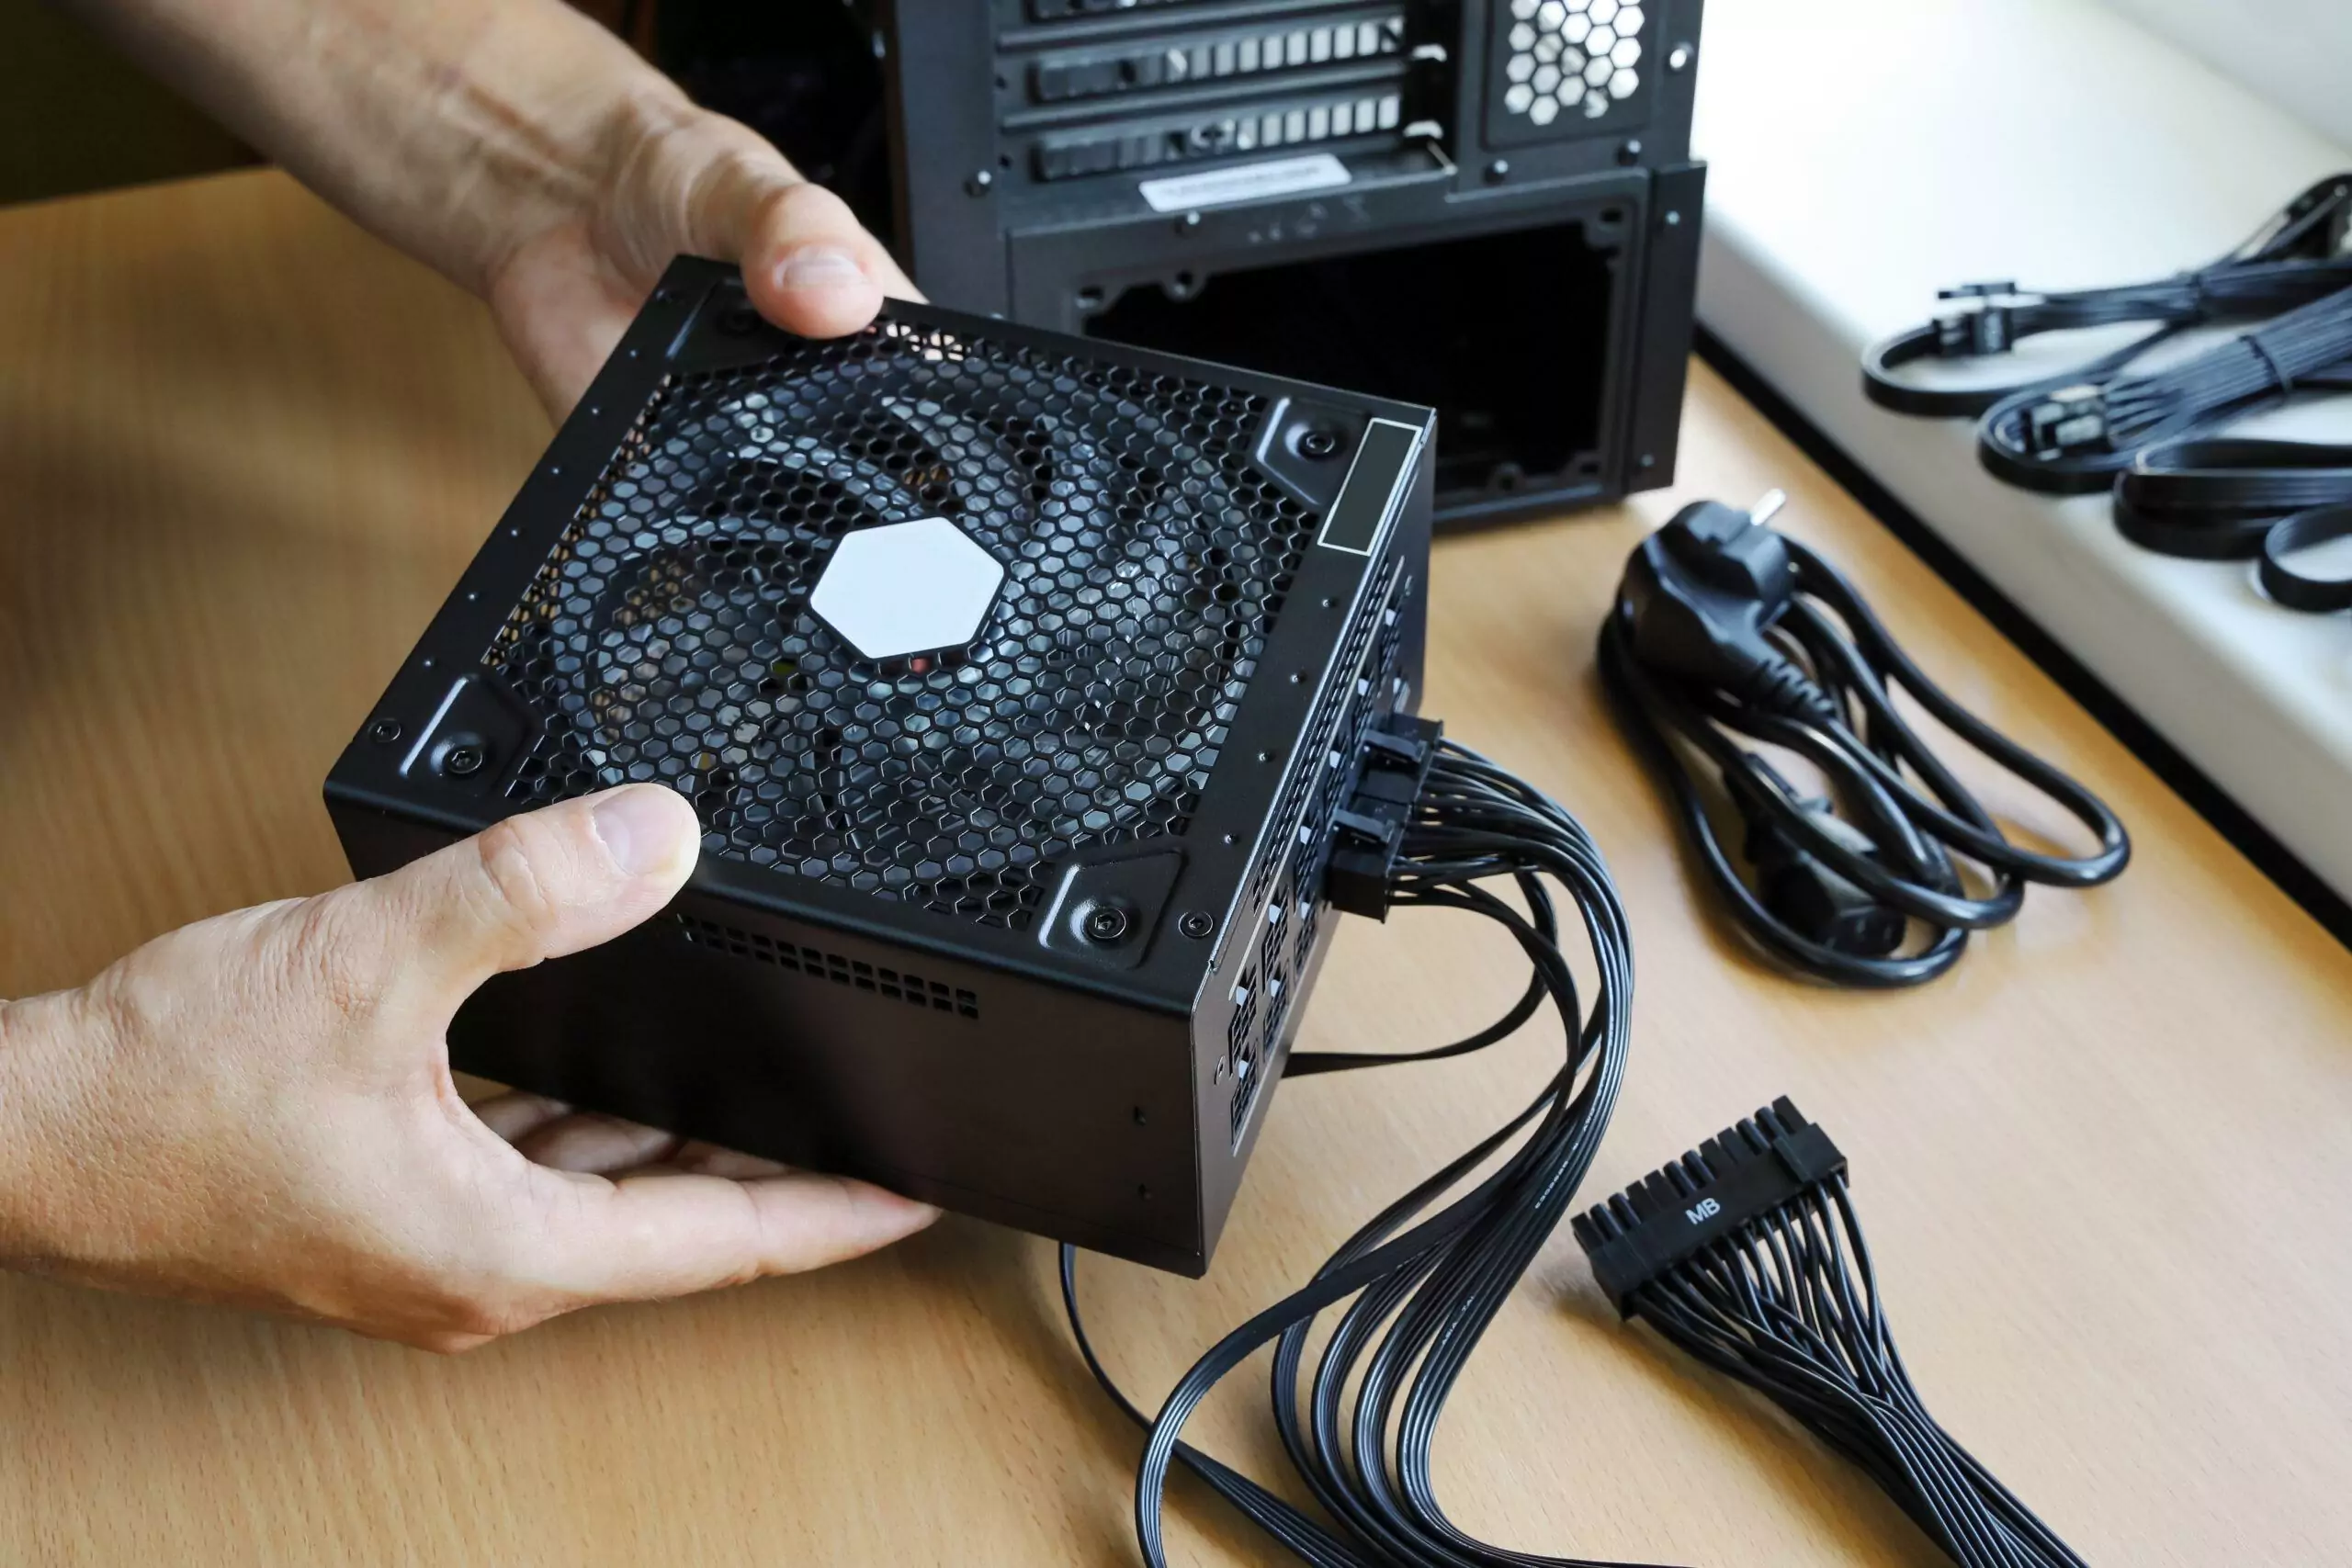 Hands hold power supply unit with connected wires to install it in computer case